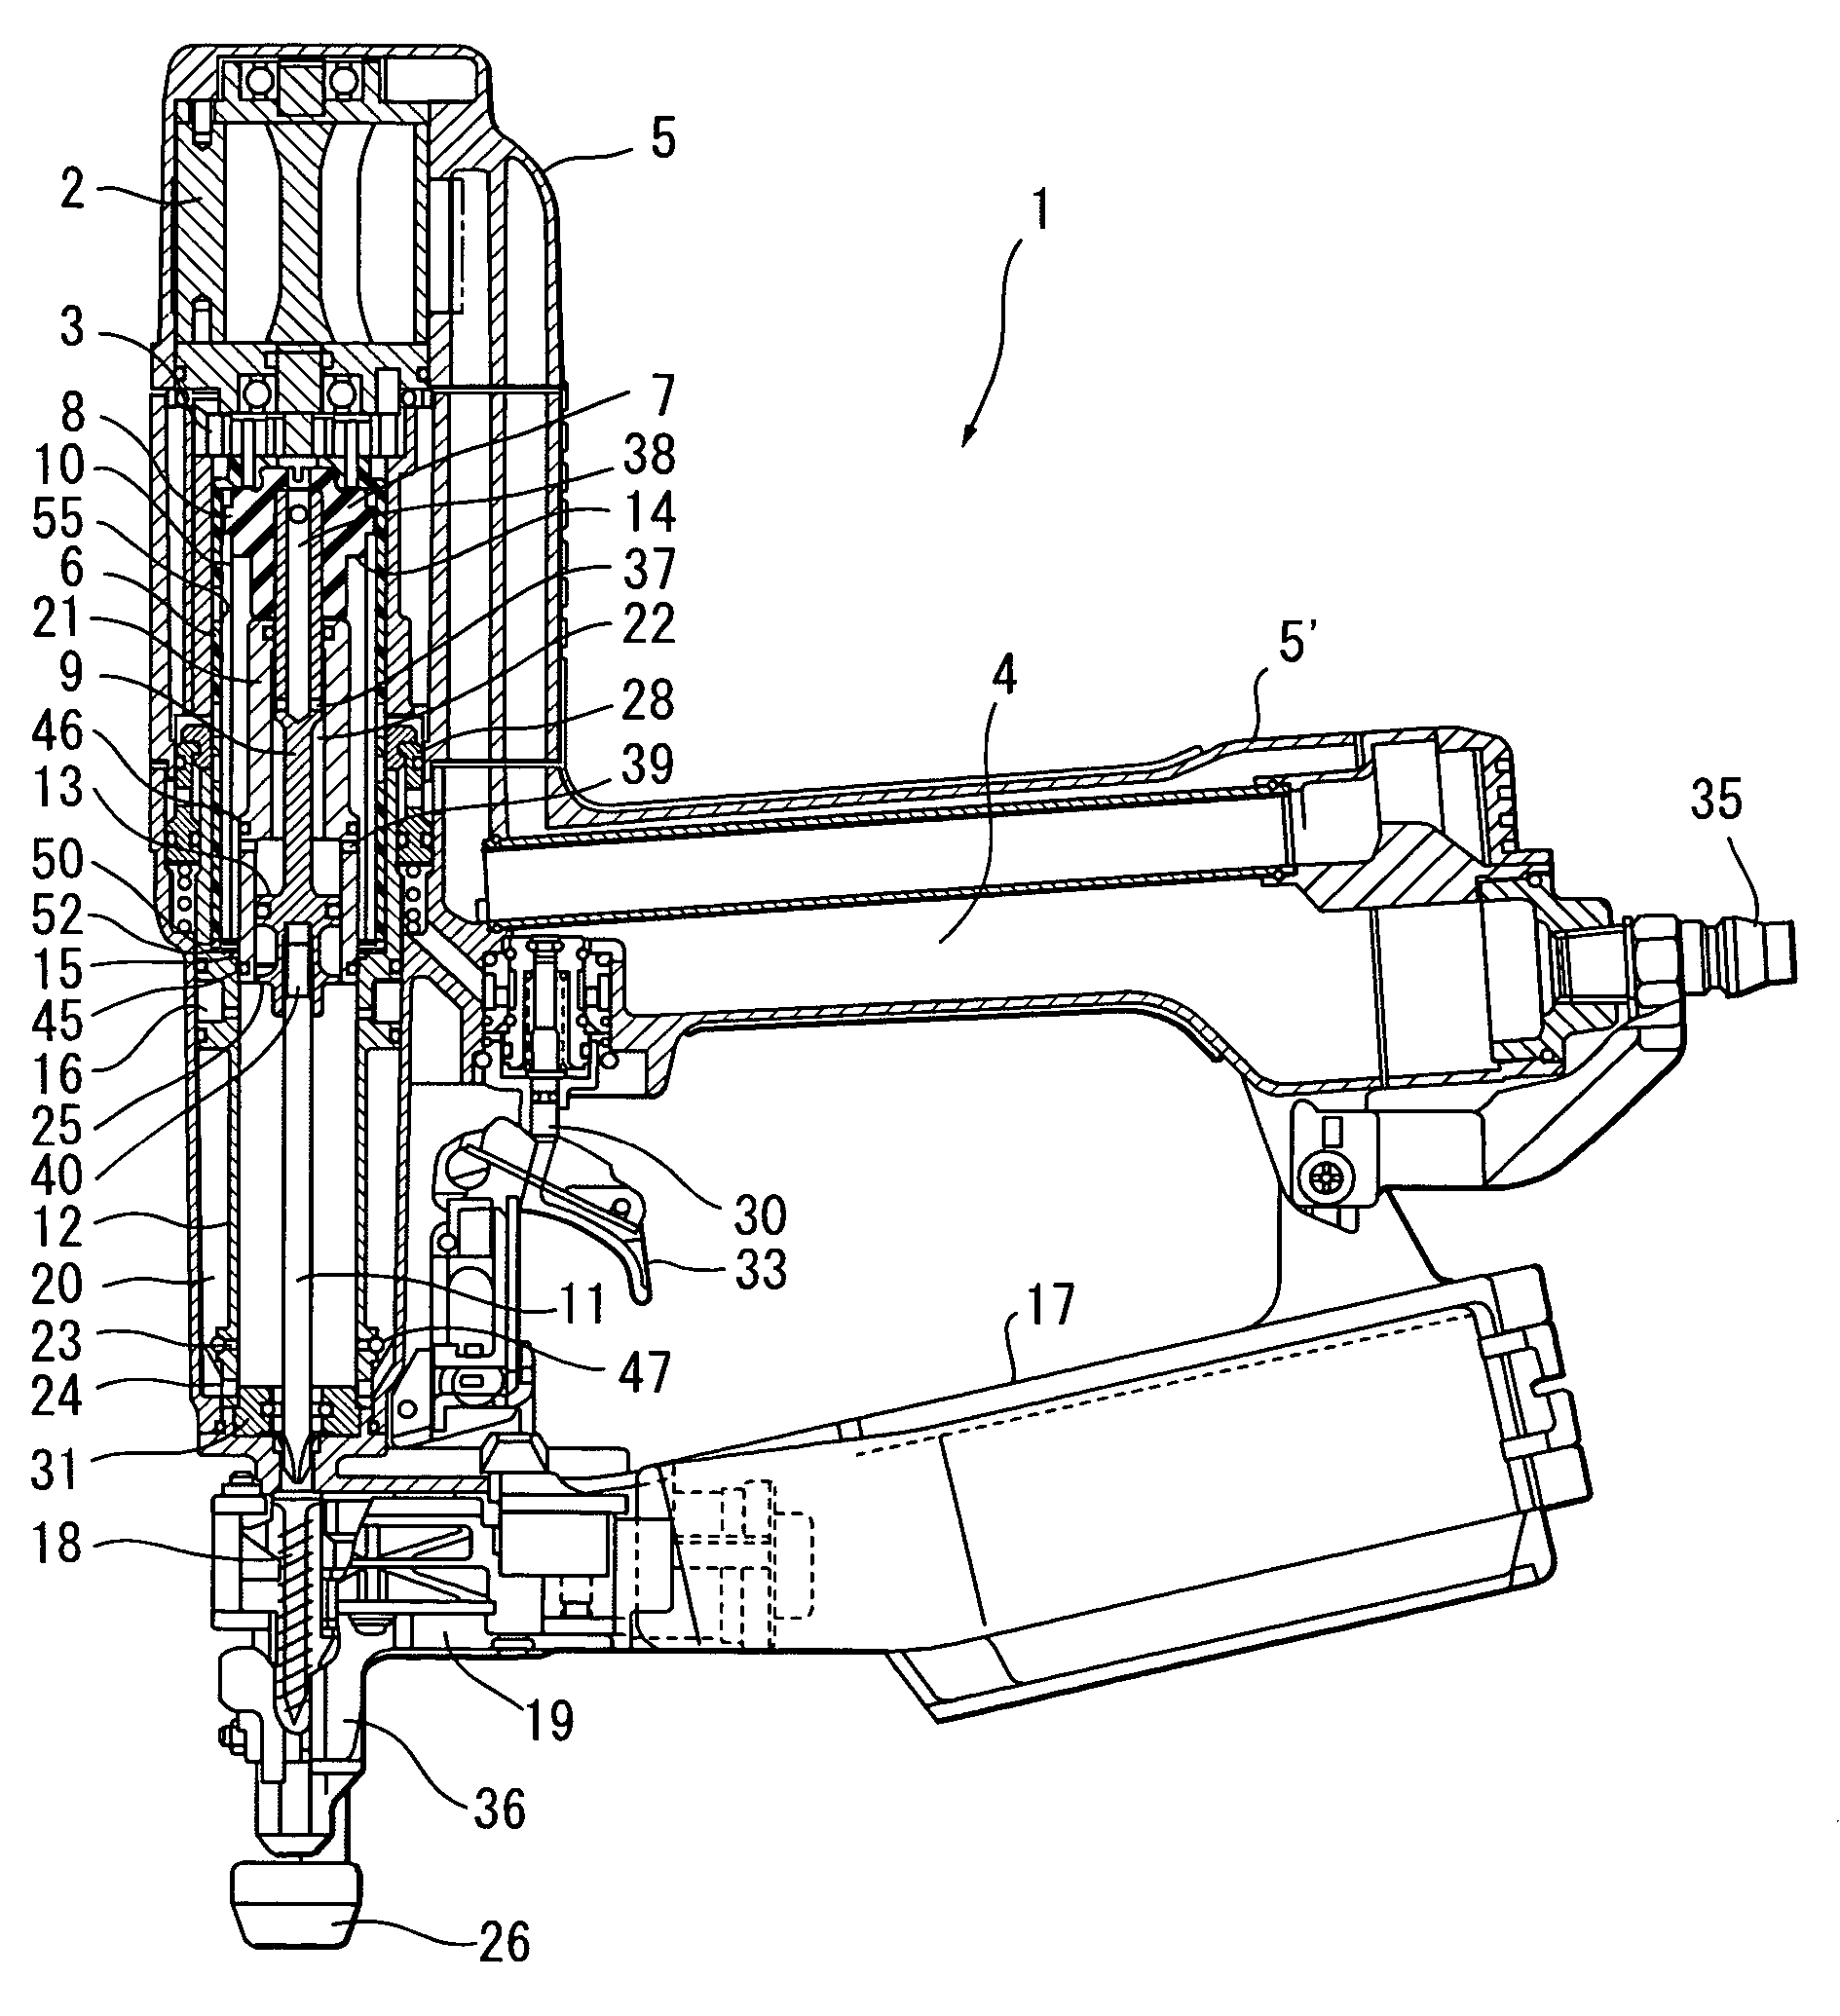 Pneumatically operated screw driver